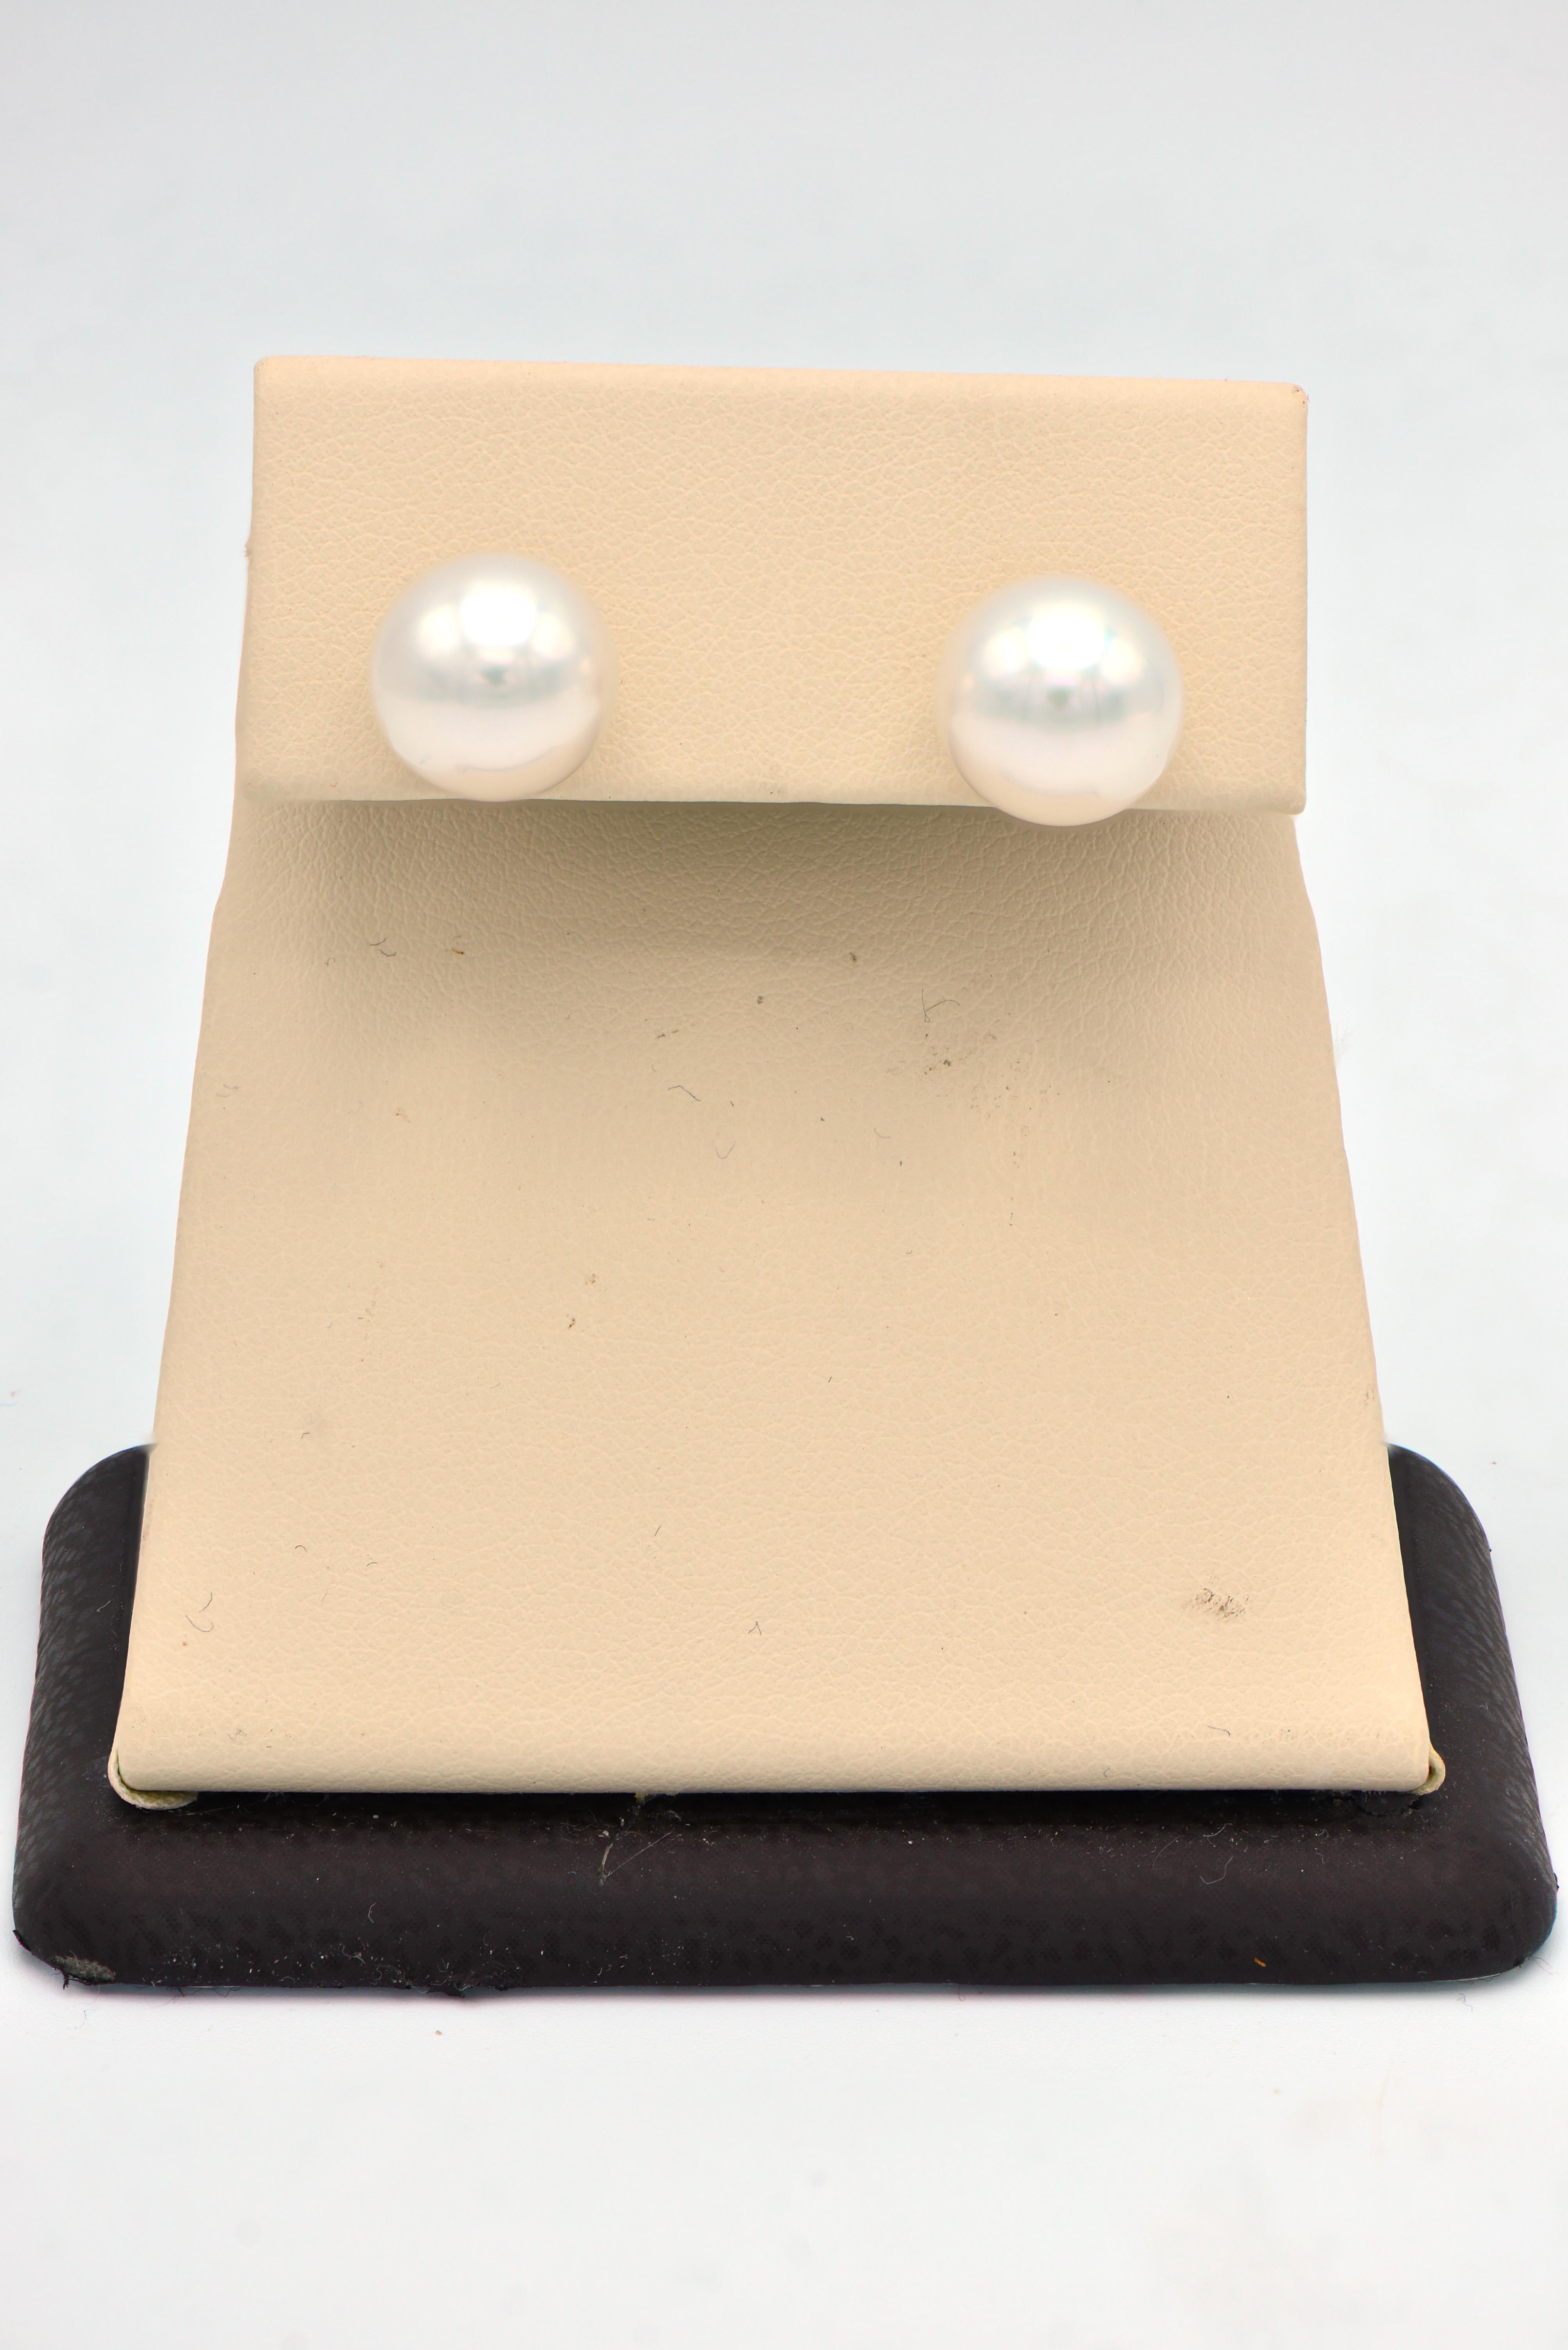 Contemporary South Sea Pearl Stud Earrings with 14 Karat White Gold Posts and Backs